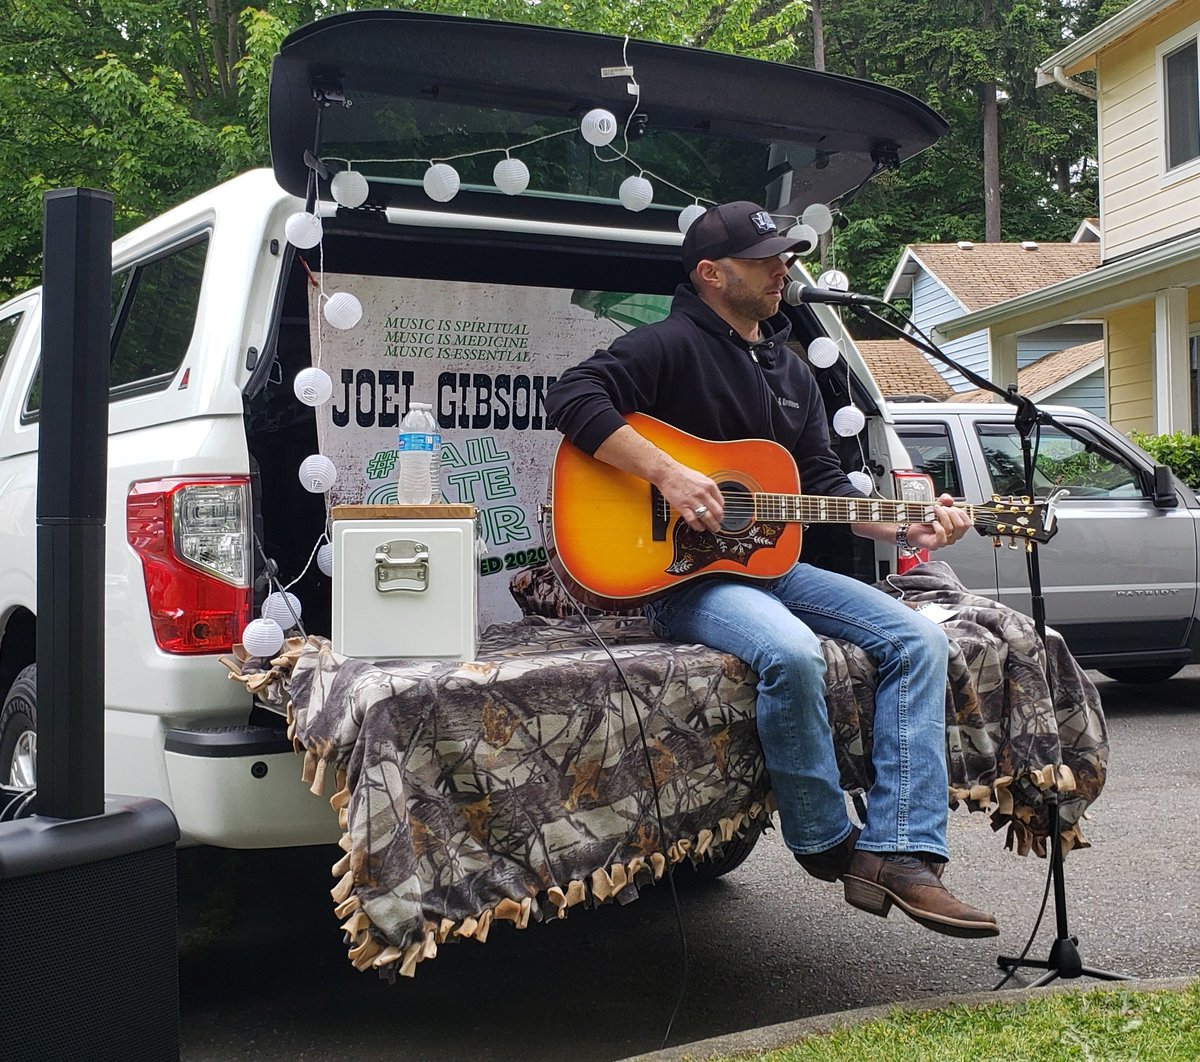 @989Bull @FollowFITZ Was out on the #TailgateTour bringing music to driveways in support of Mental Health Awareness Month. #musicisspiritual #musicismedicine #musicisessential @JoelGibsonJr